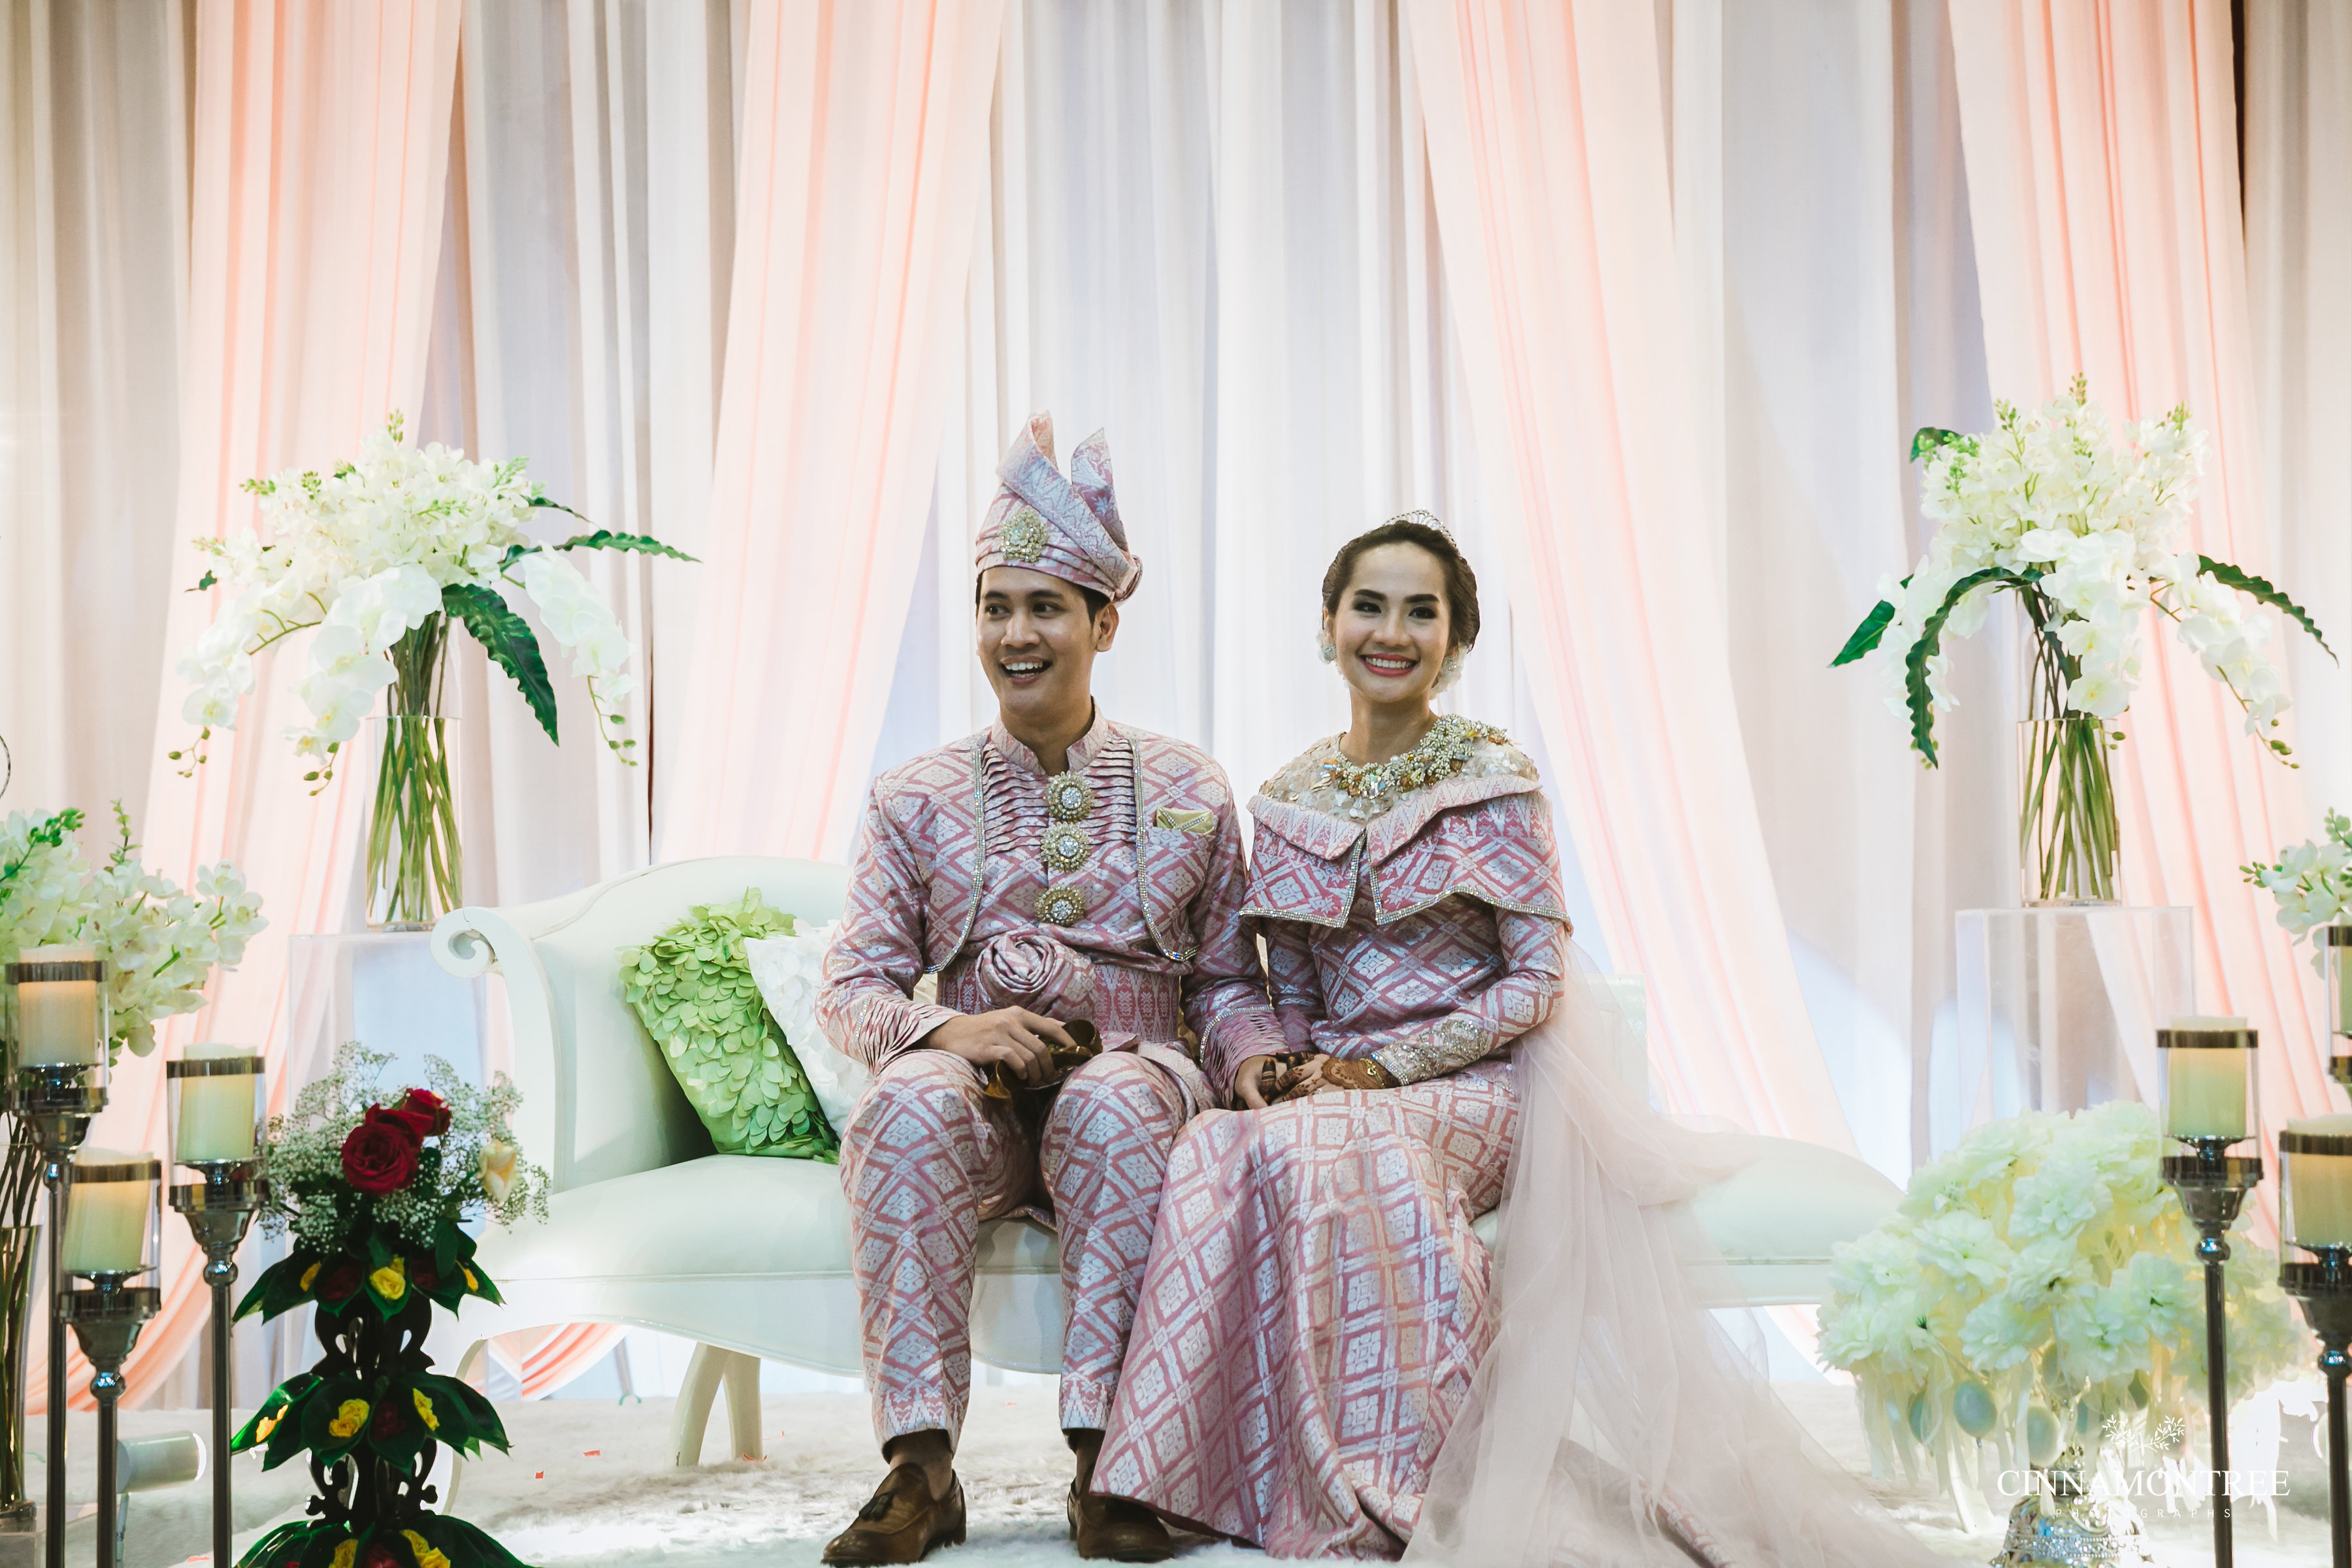 Malay Wedding Package Price - My Personal Experience